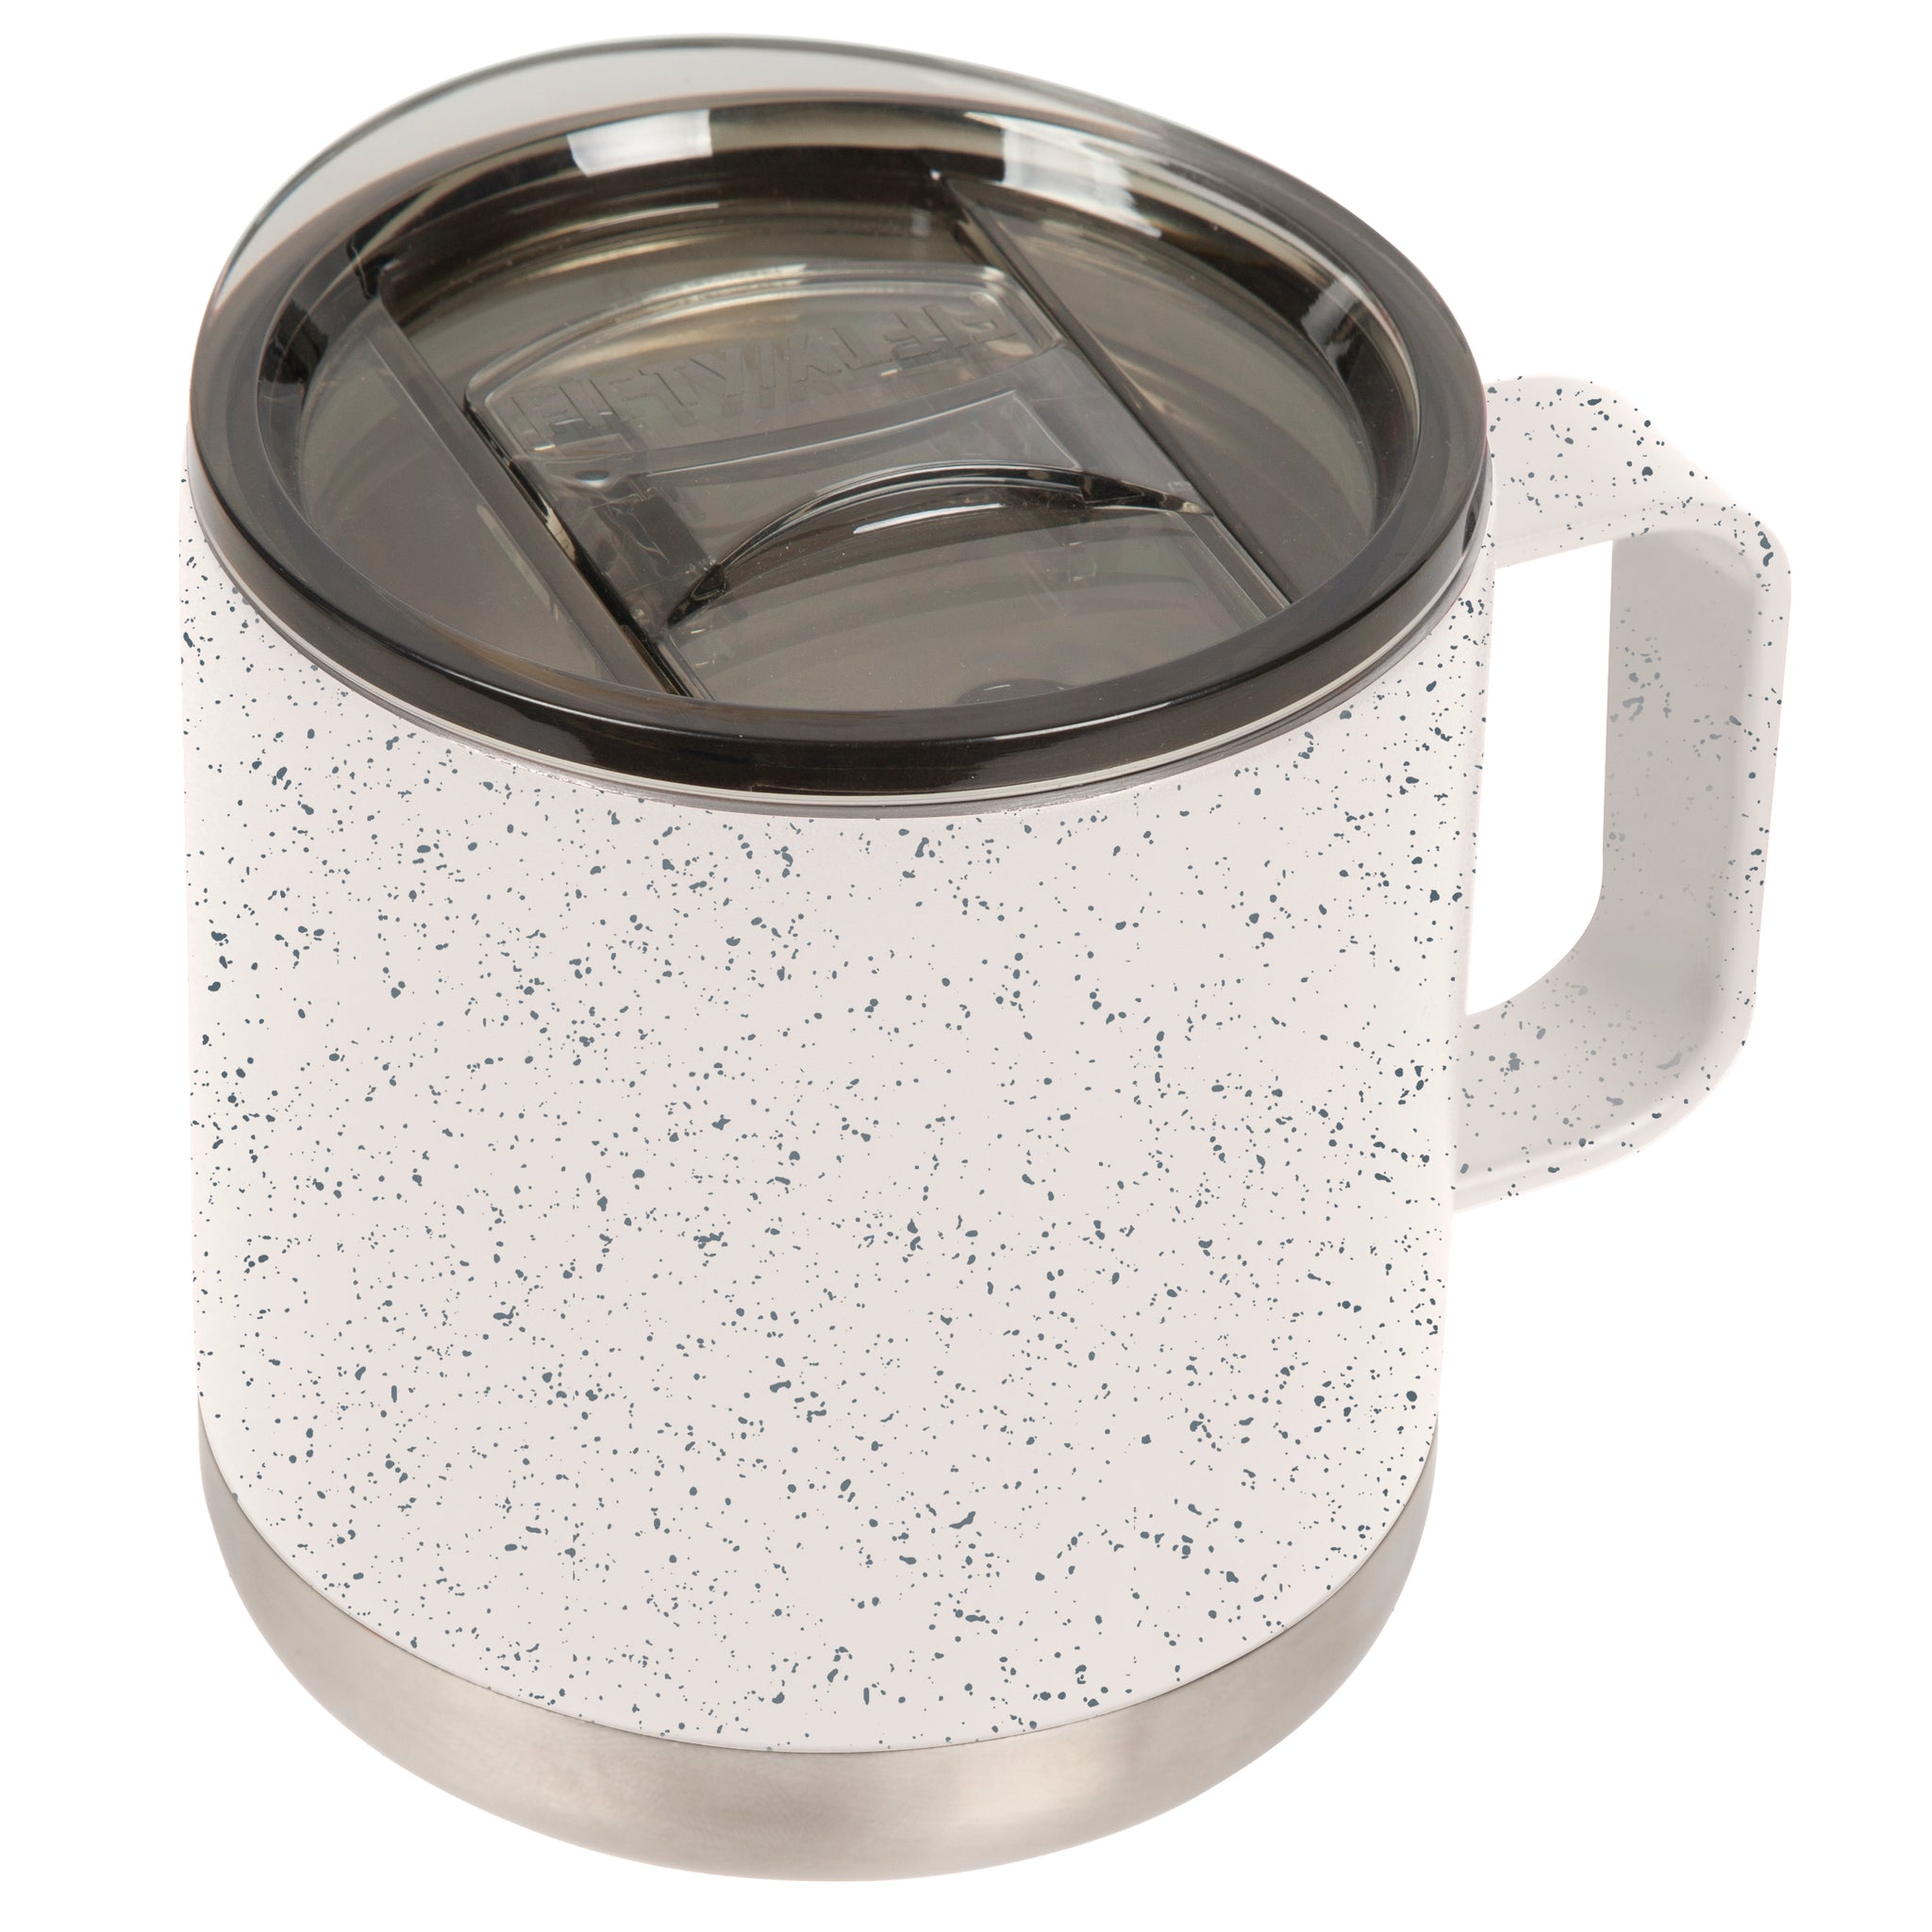 Insulated Mug with Handle and Lid - Youth Dynamics